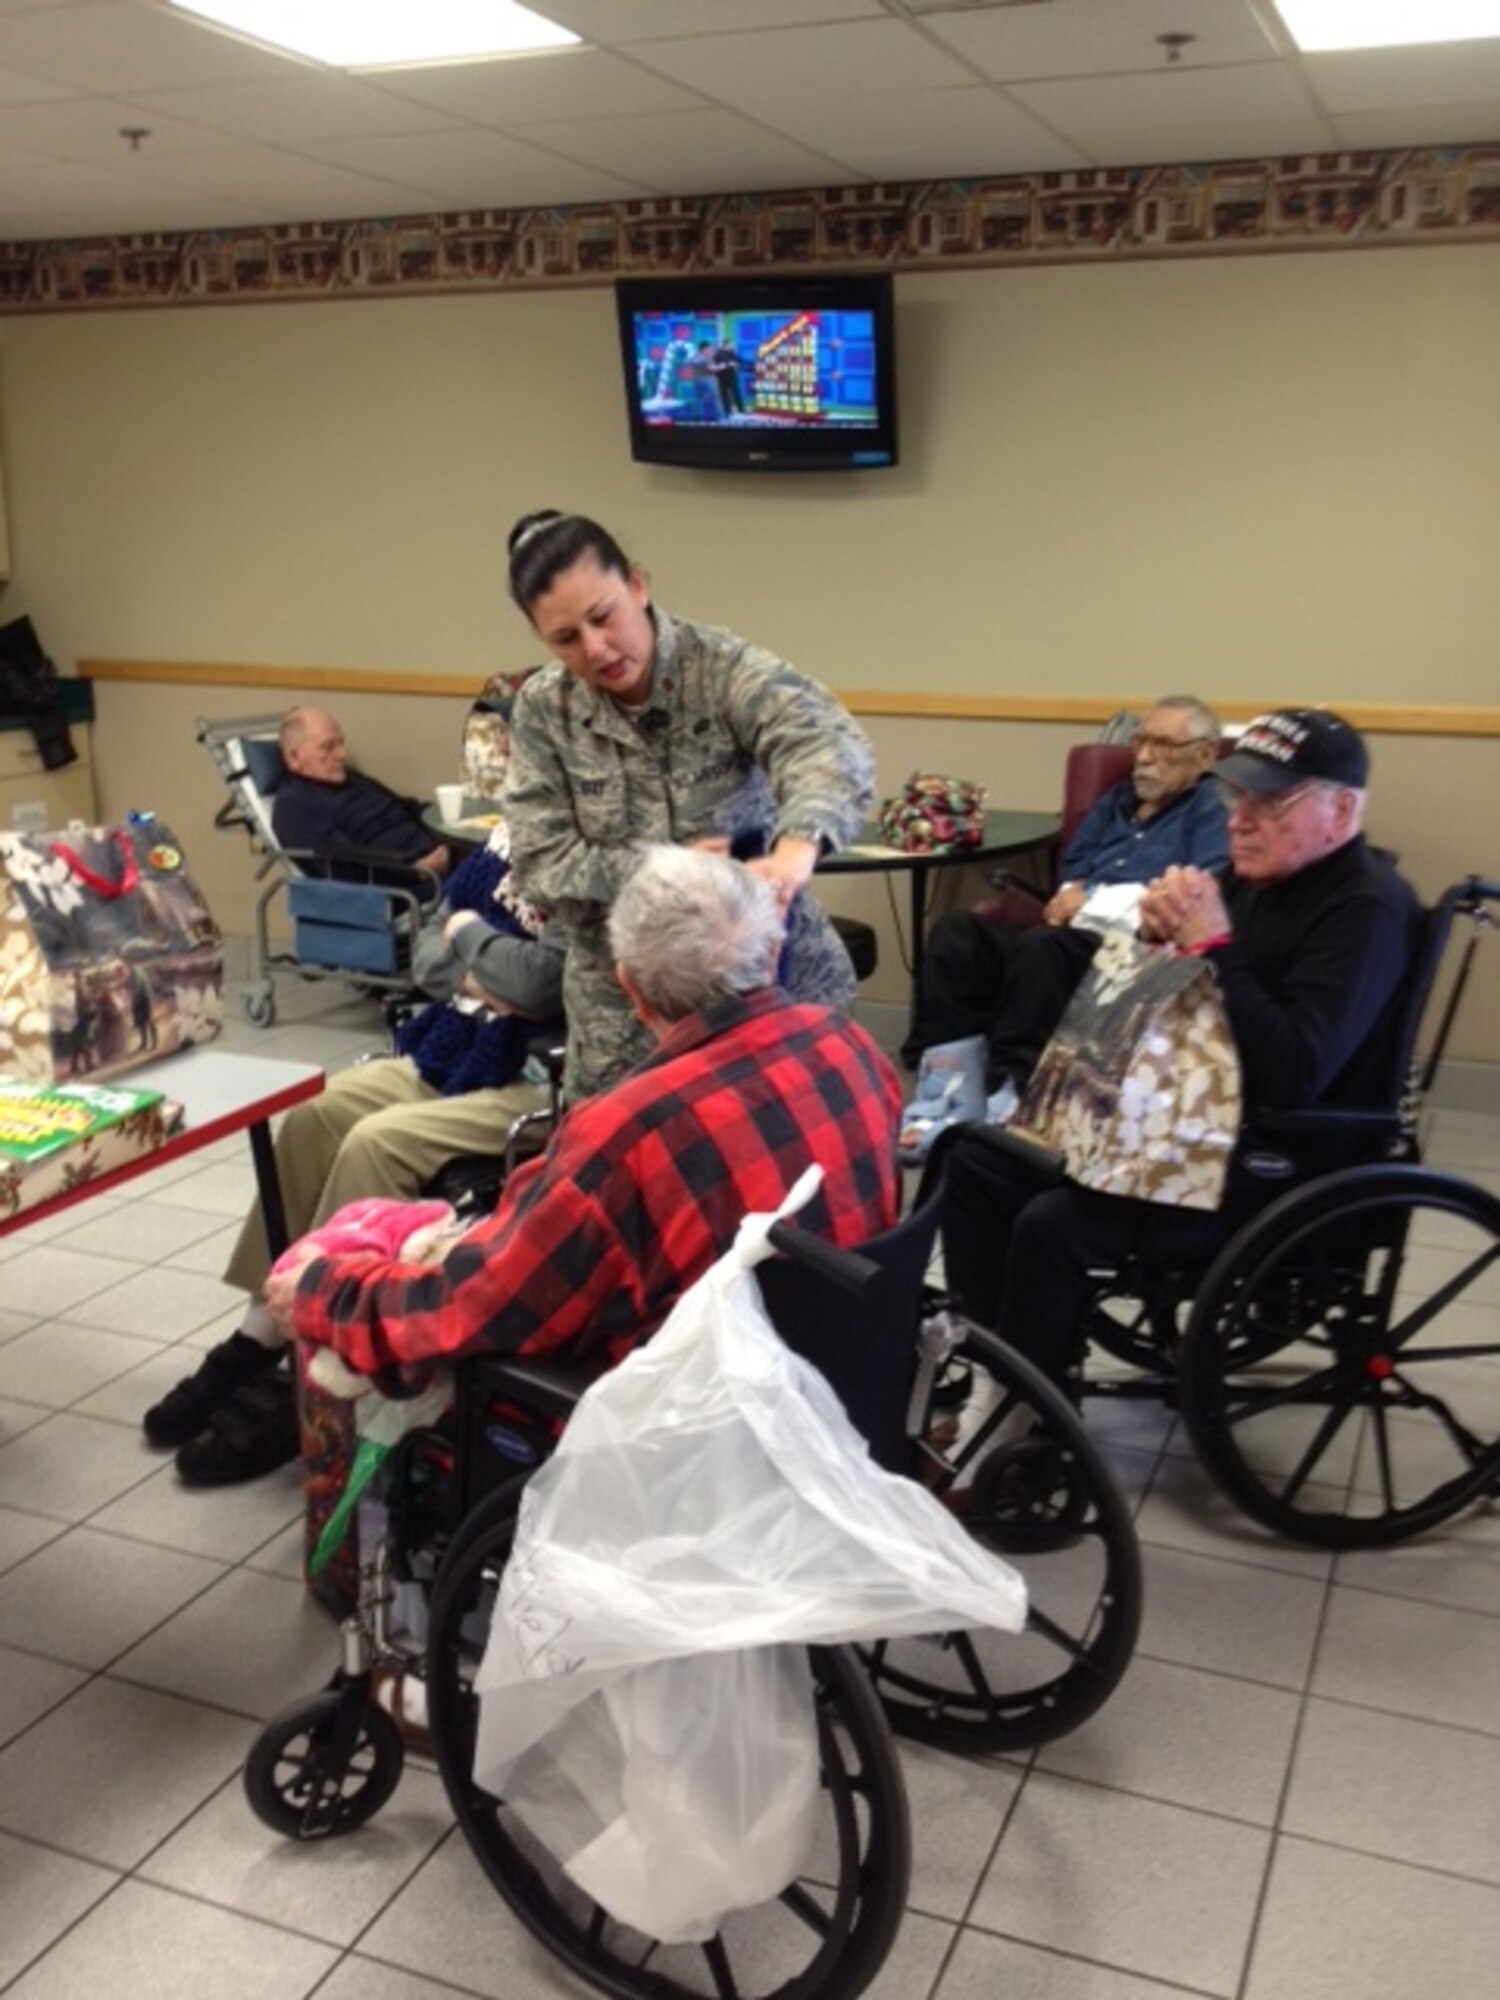 Major Lena Holliday, 507th Force Support Squadron passes out gifts to the veterans at the annual Norman Veterans Center Christmas party, Dec. 23. (U.S. Air Force Photo/1st Lt. Cristi Jordan)